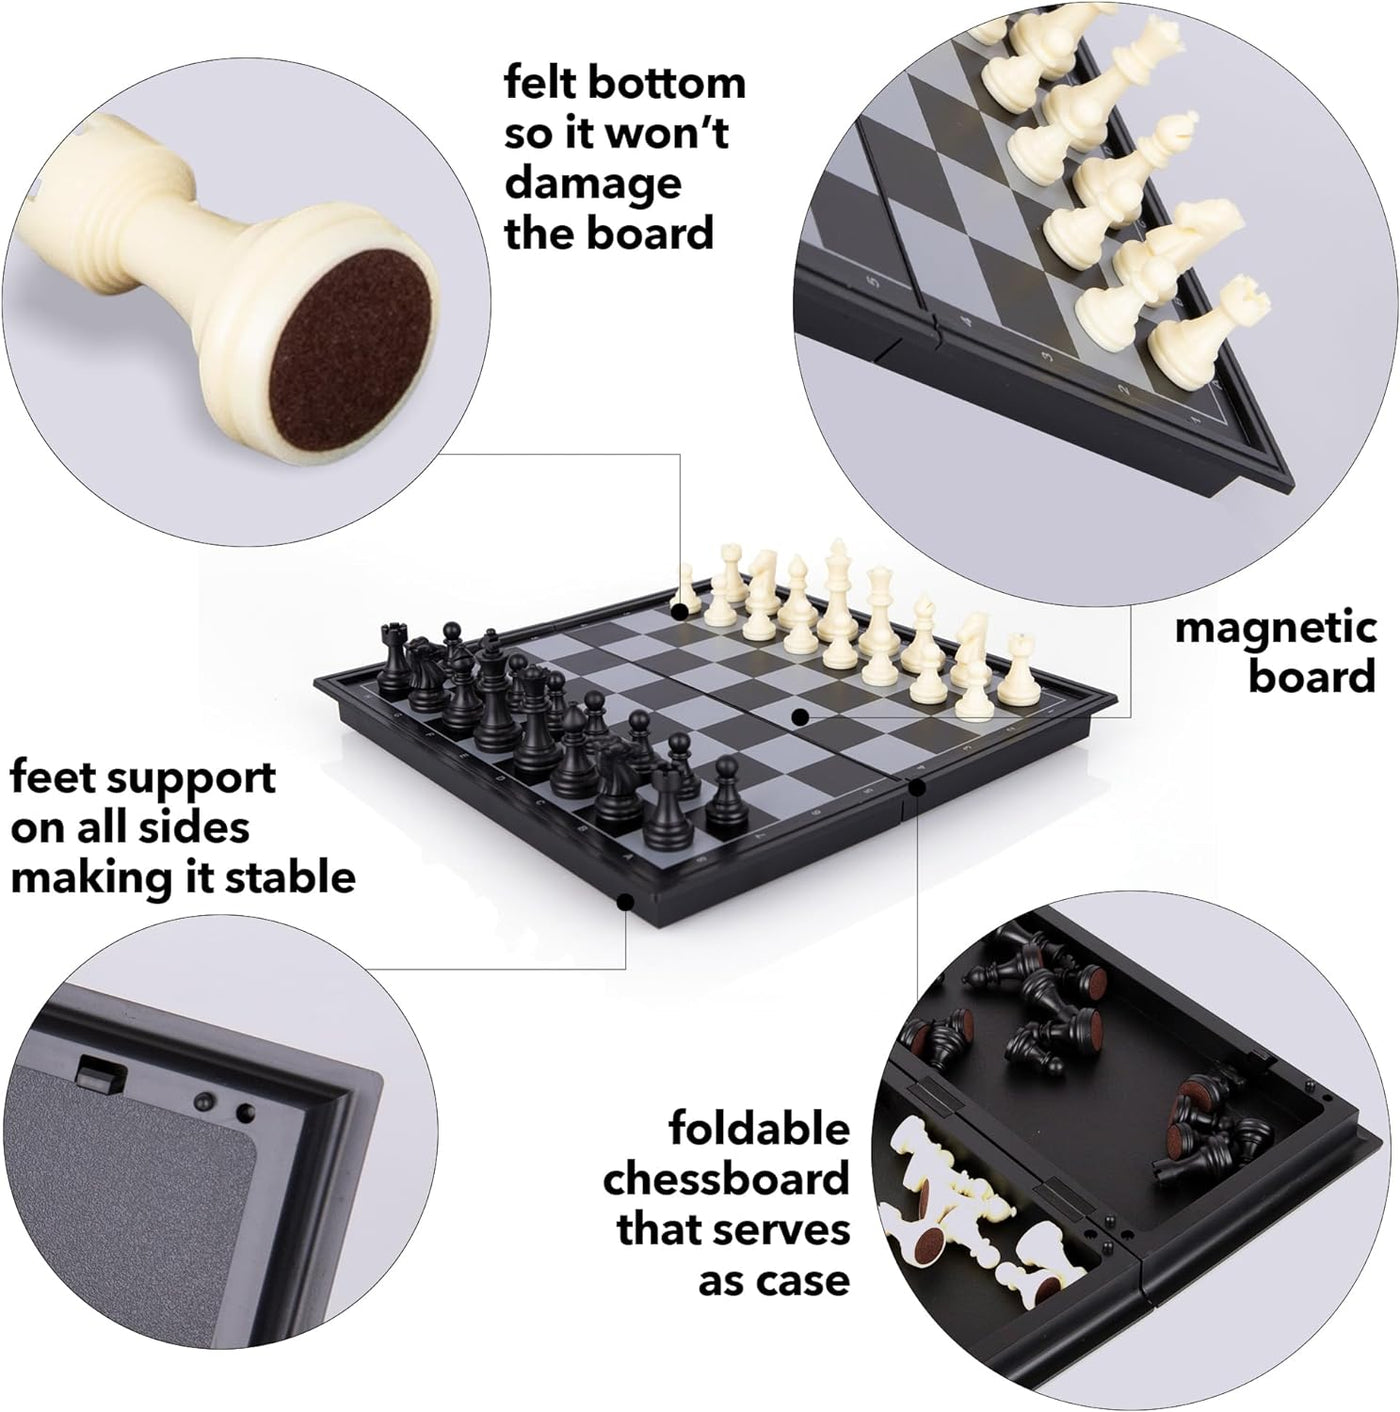 Gamie Magnetic Travel Chess Game, Foldable Portable Chess Board Game for Kids, Entertaining Road Trip Toys, Travel Games, and Desktop Toys for Adults